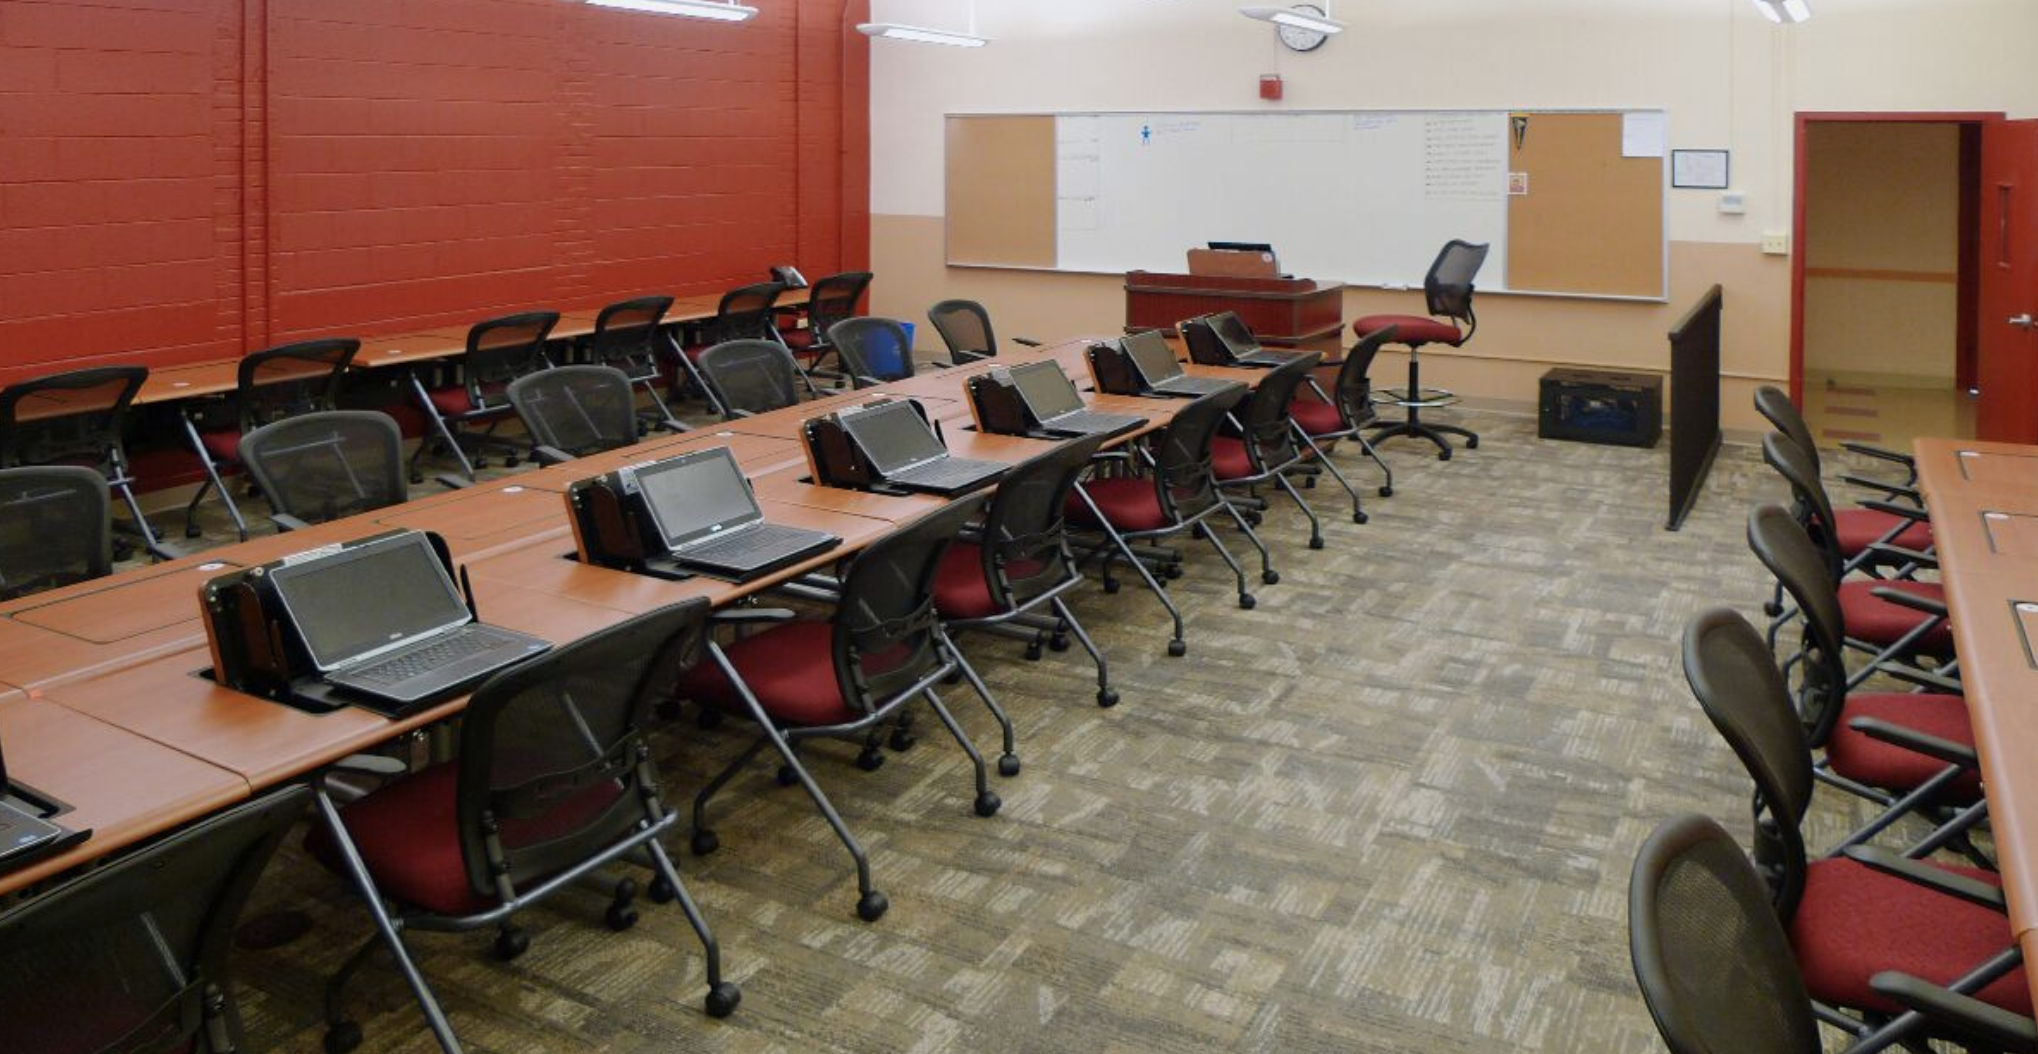 Shop Raised Access Flooring For Classrooms From SMARTdesks 800-770-7042